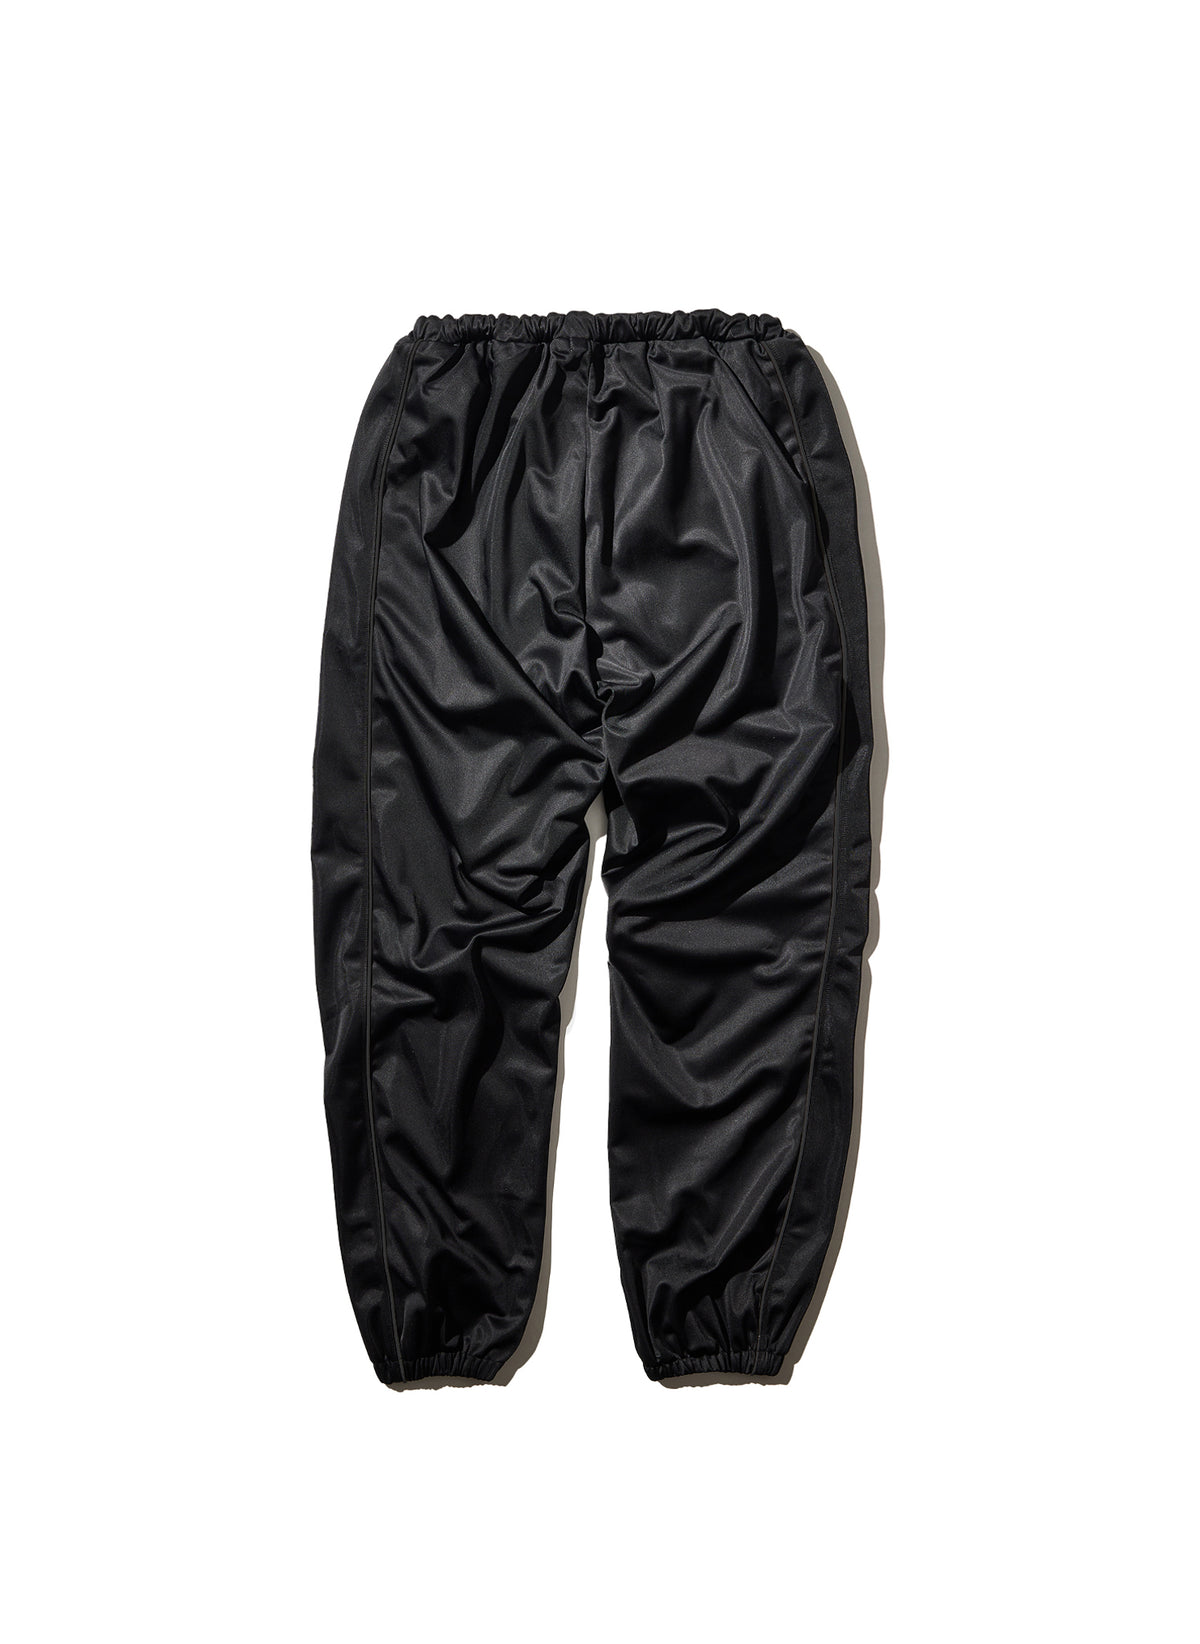 WILLY CHAVARRIA / BUFFALO TRACK PANT SOLID BLACK